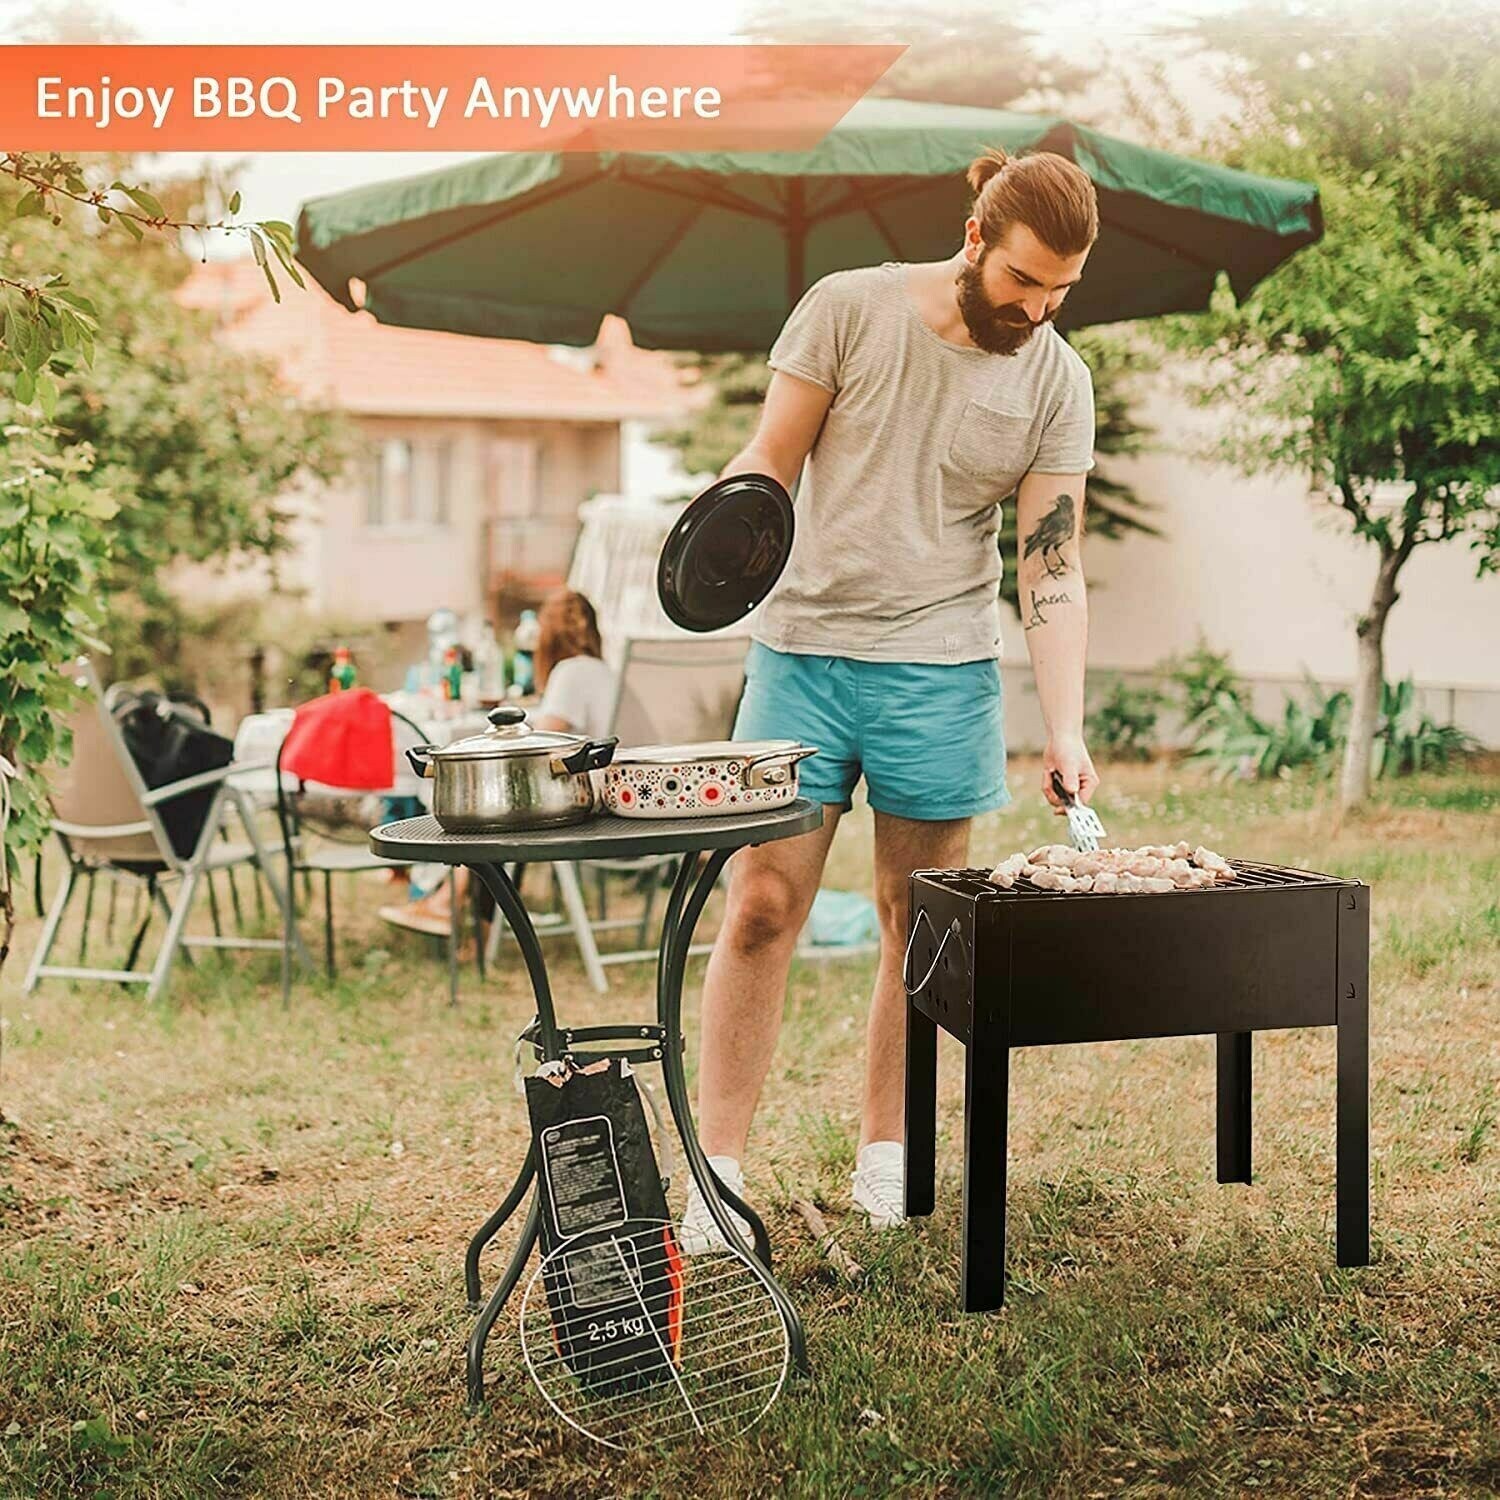 https://ak1.ostkcdn.com/images/products/is/images/direct/157cc5ff46ecf5c83a2bc676c883fe63b80dfcee/14-inchs-Portable-Charcoal-Barbecue-Grill%EF%BC%8C-Detachable%2C-Black.jpg